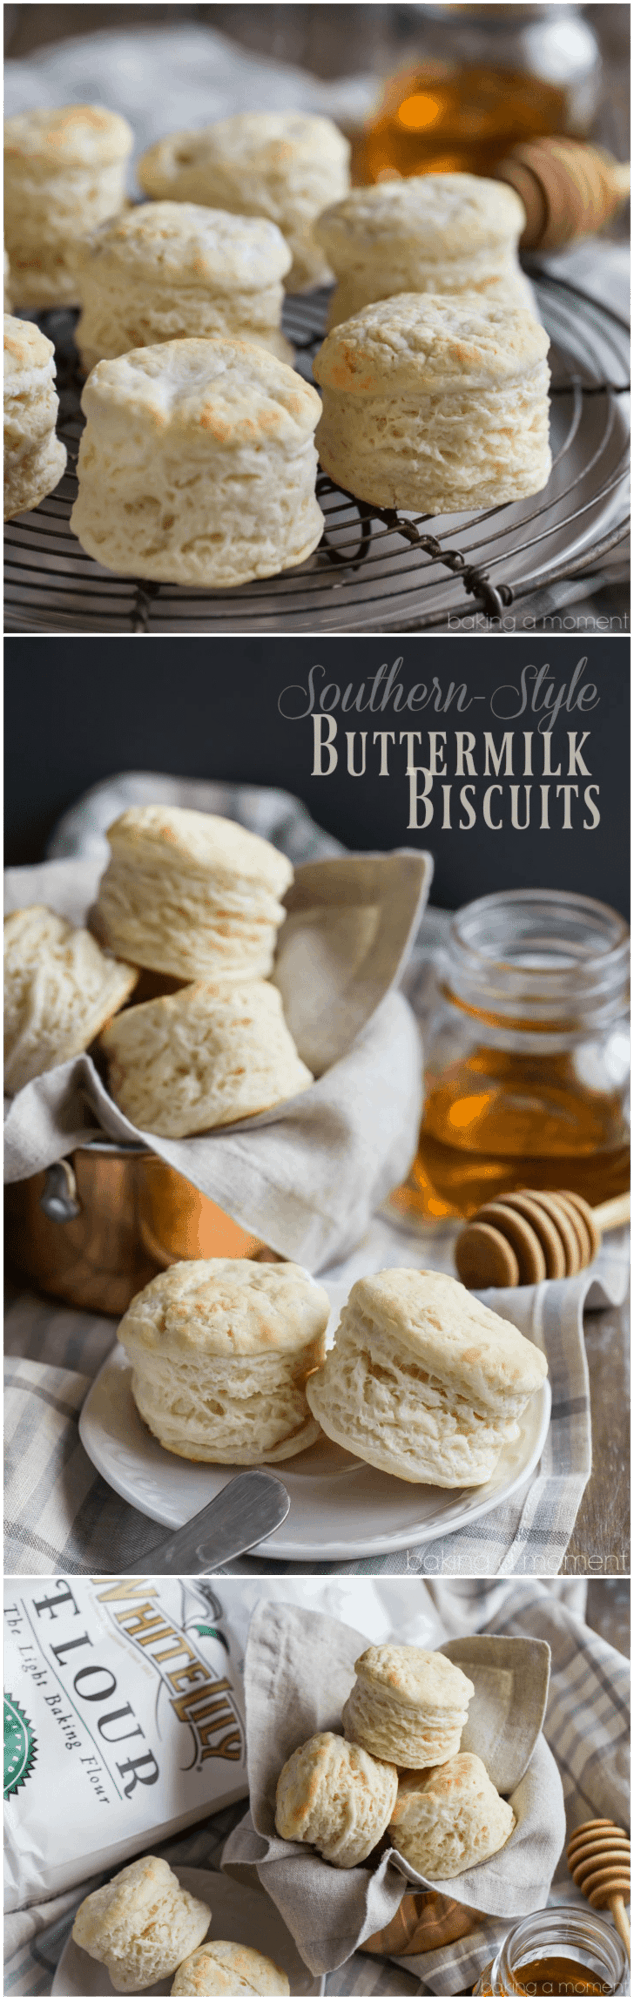 Picture collage of homemade buttermilk biscuits.